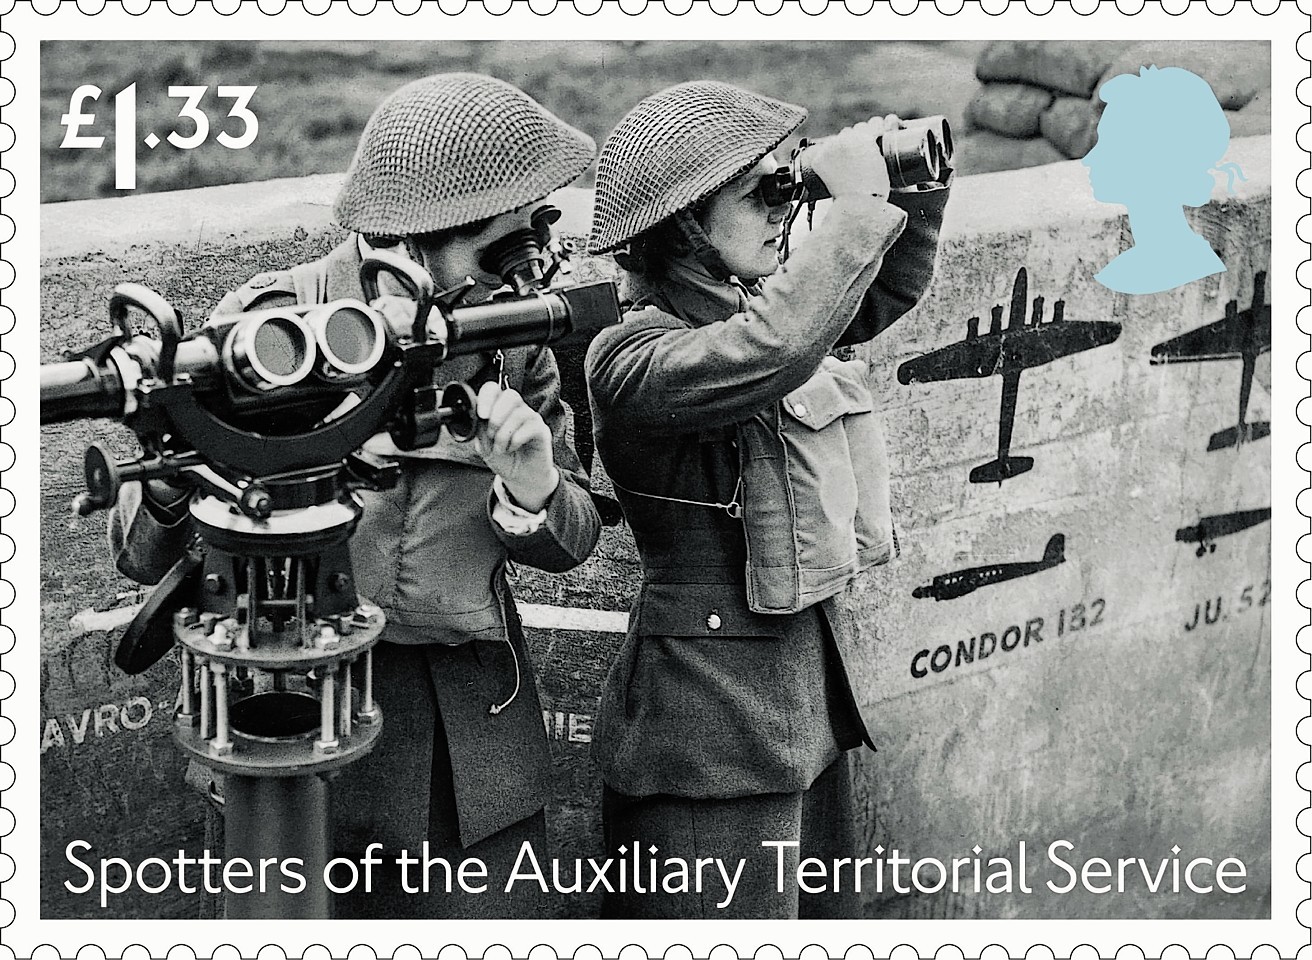 Battle of Britain stamps